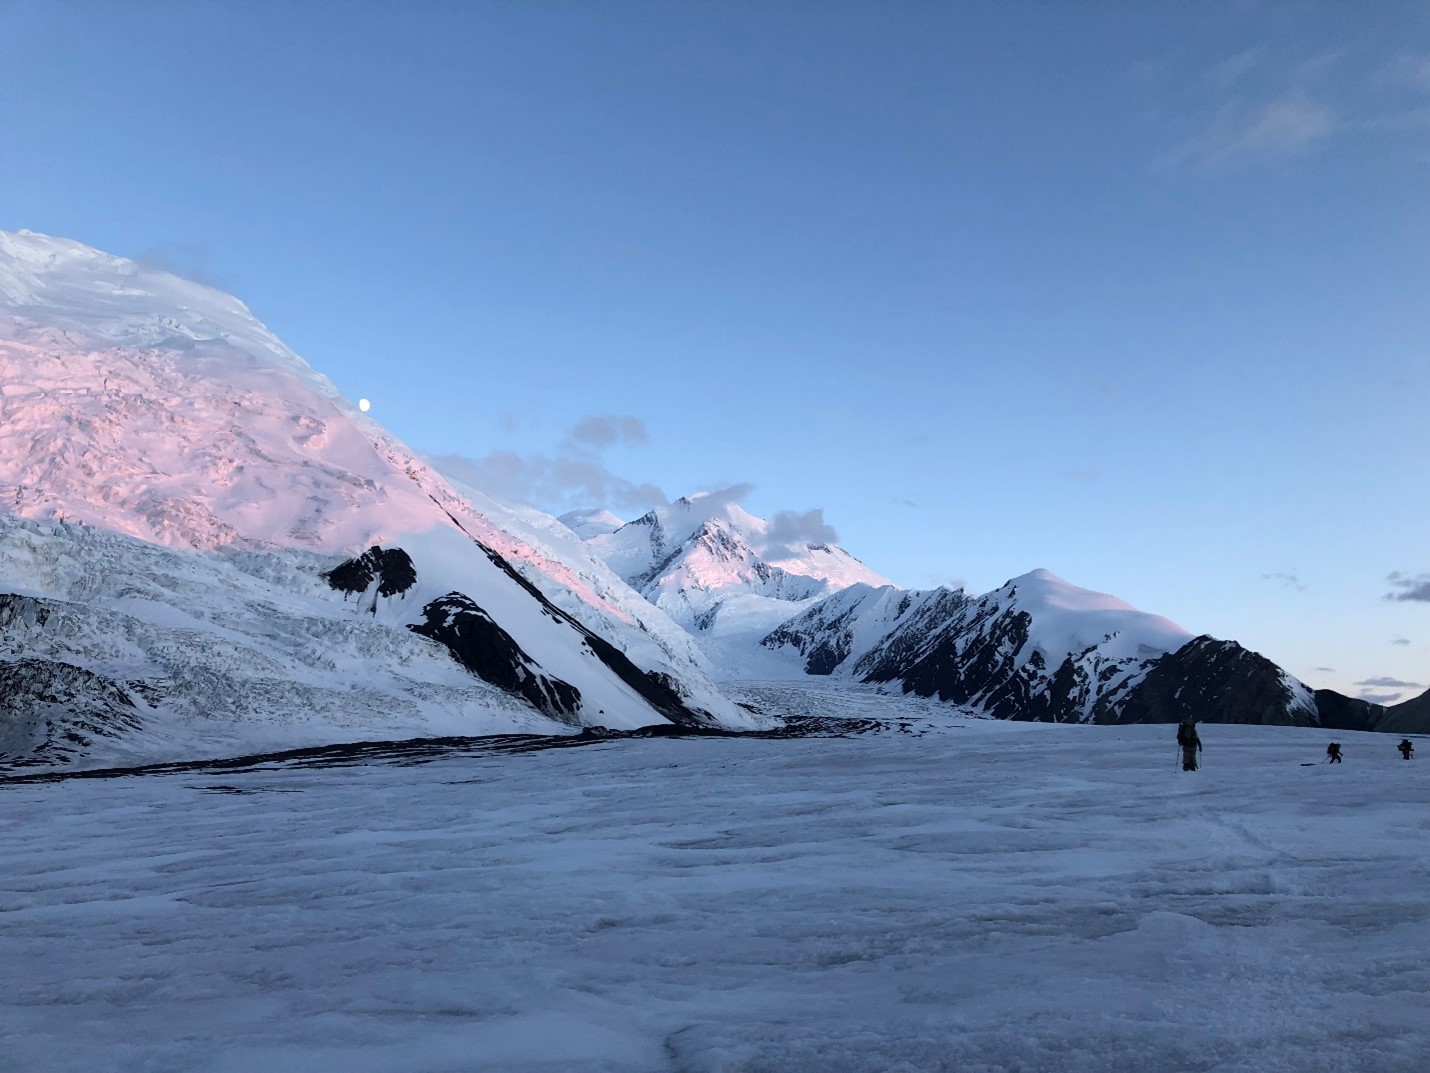 Three distant climbers move along a flat, smooth glacier surface, with pink alpenglow illuminating the surrounding snow covered ridge.